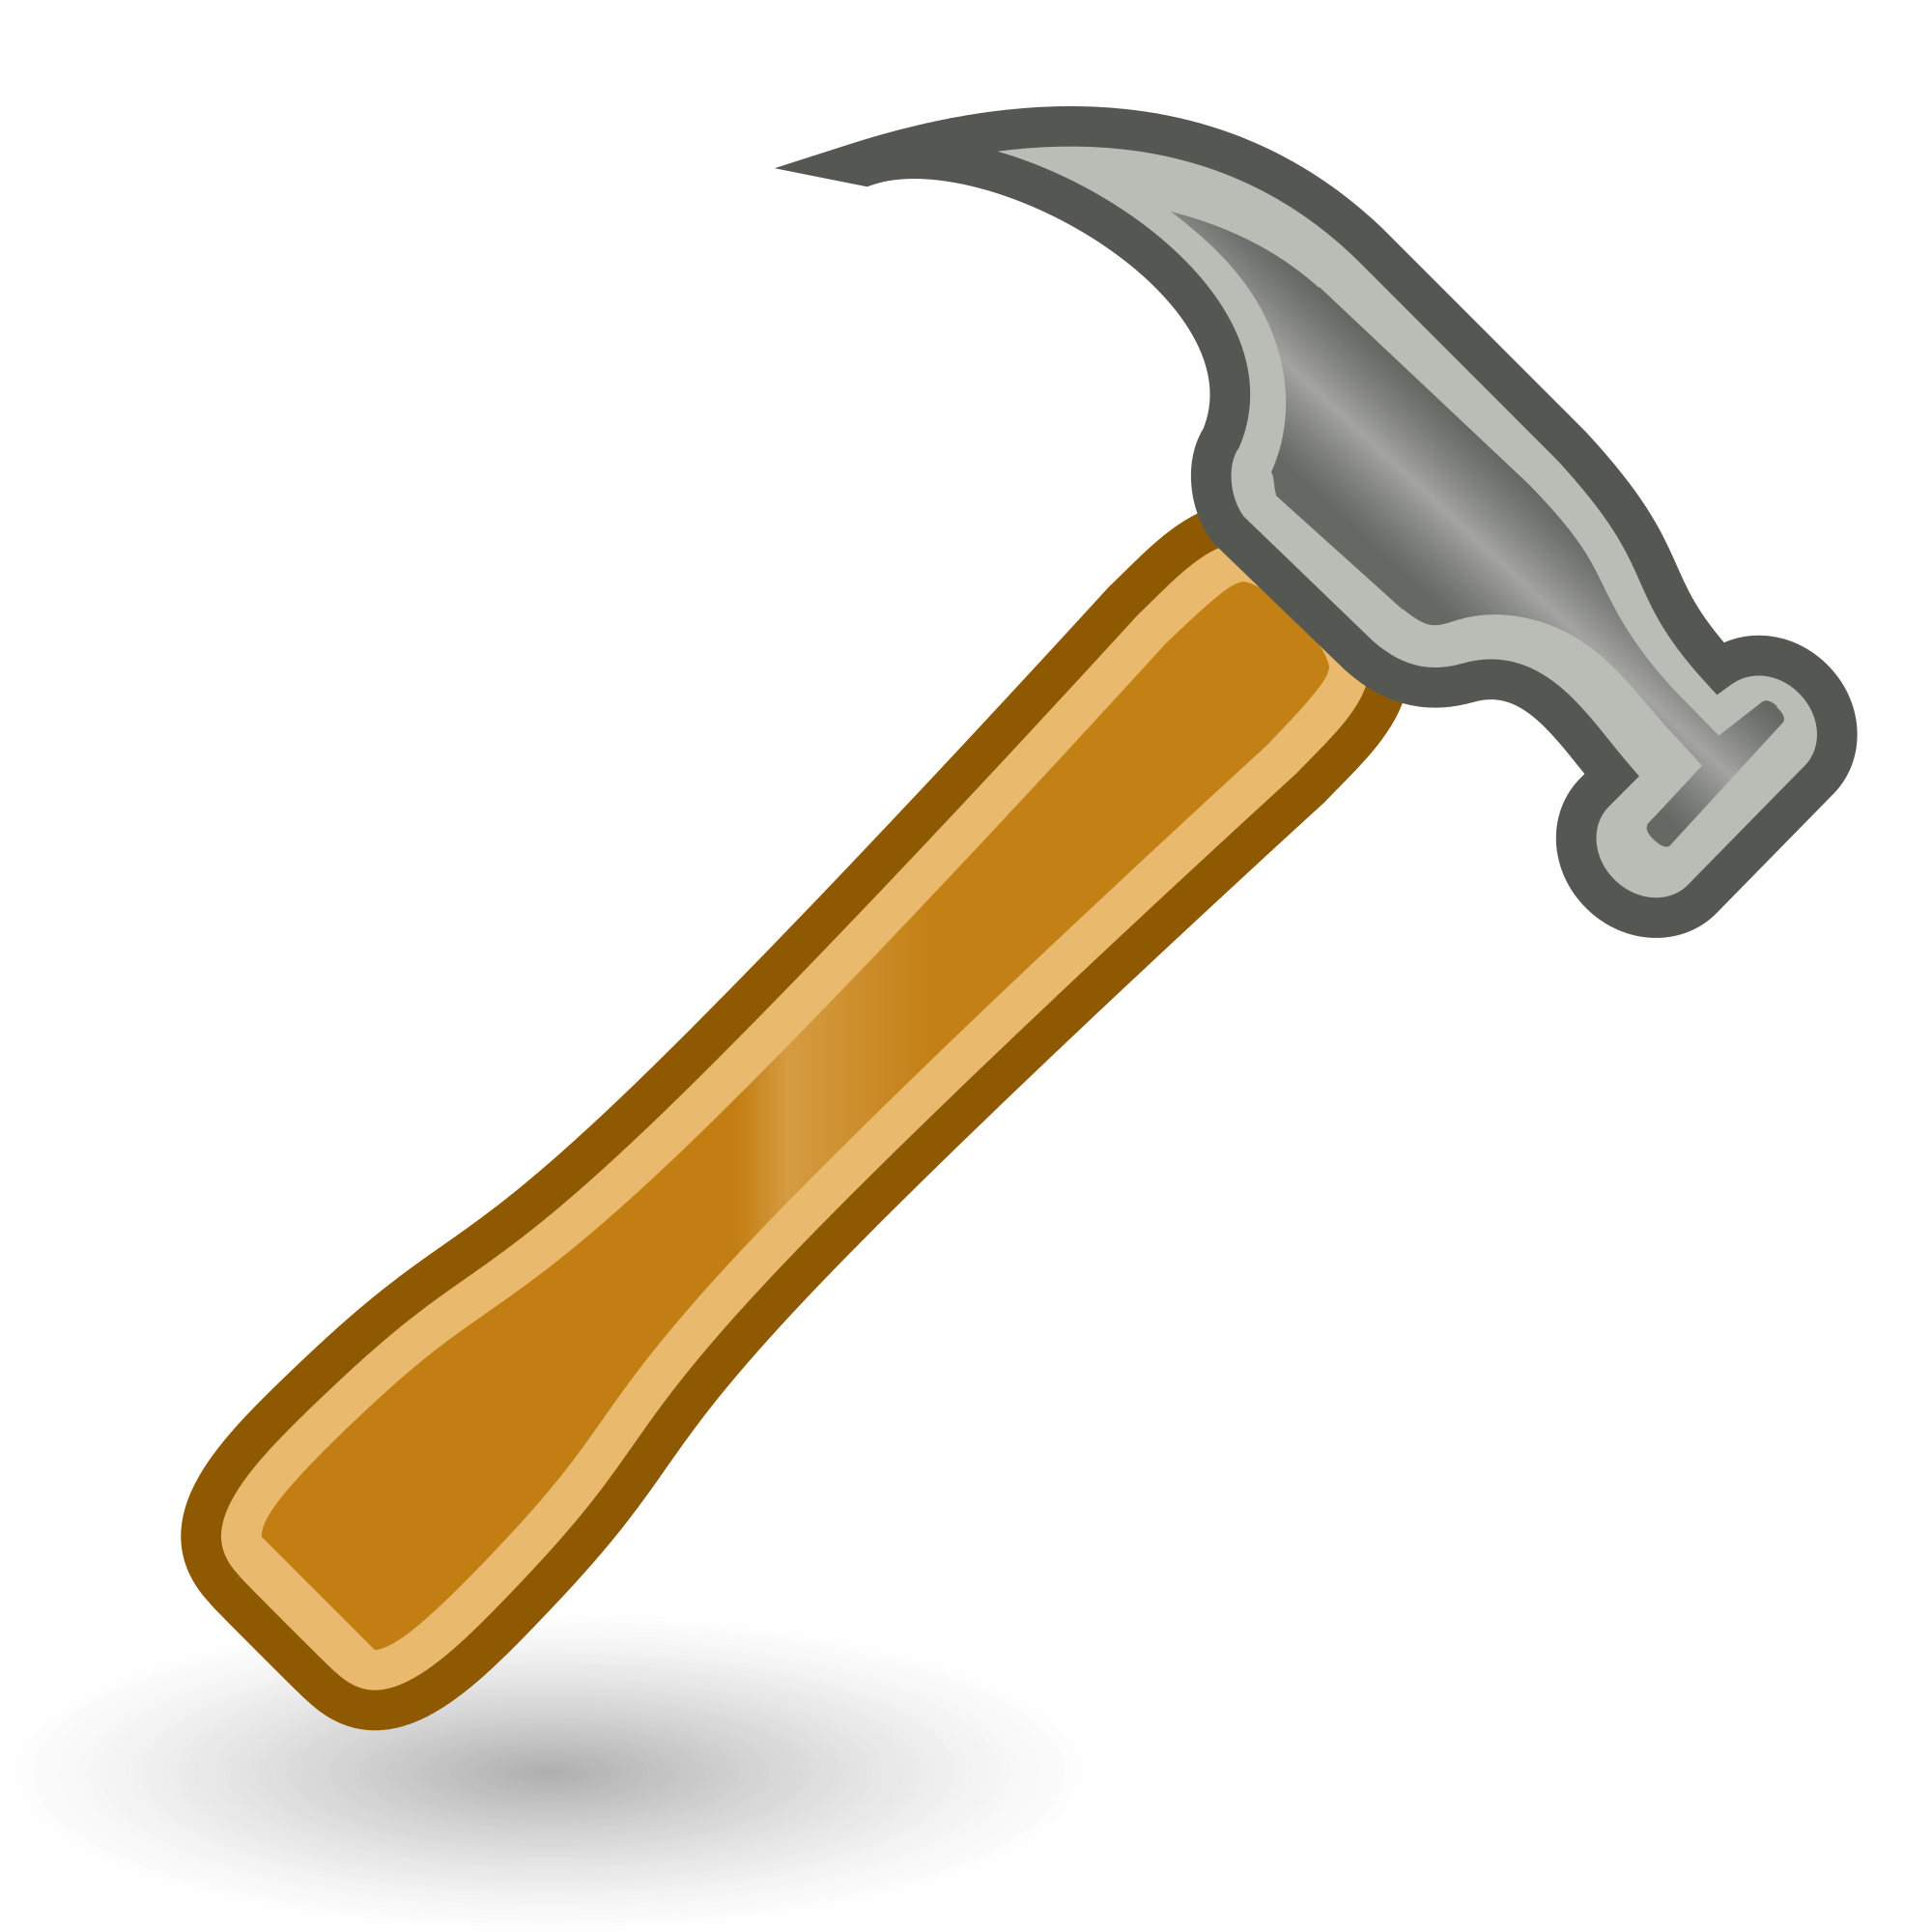 File:Tools-hammer.svg - Wikimedia Commons